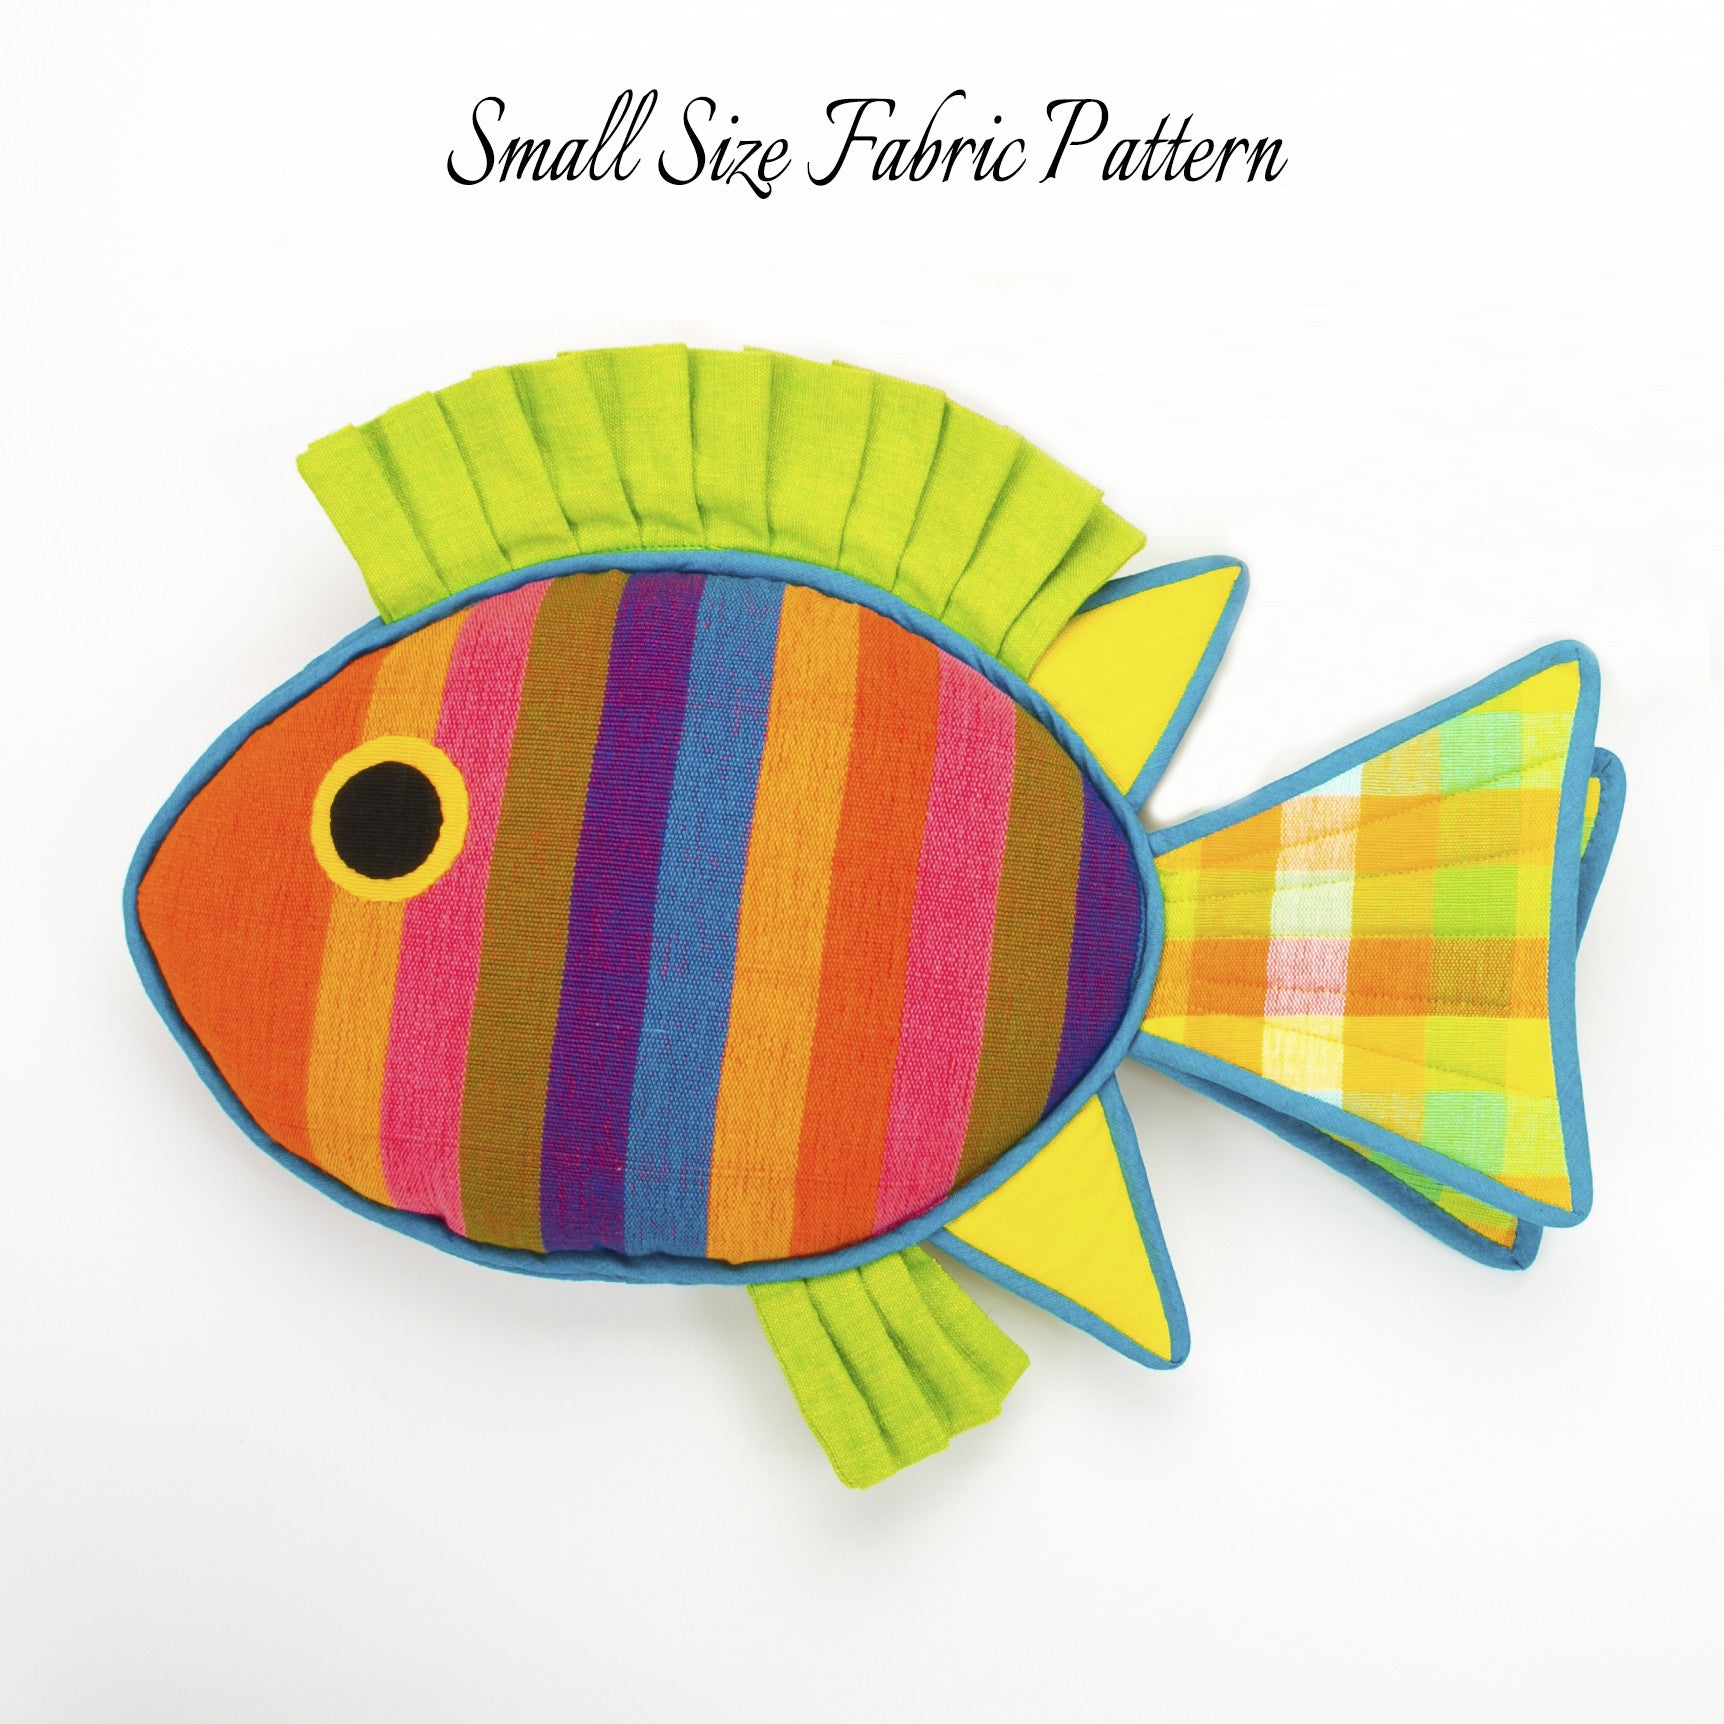 Molly, the Rabbit Fish – small size fabric pattern shown